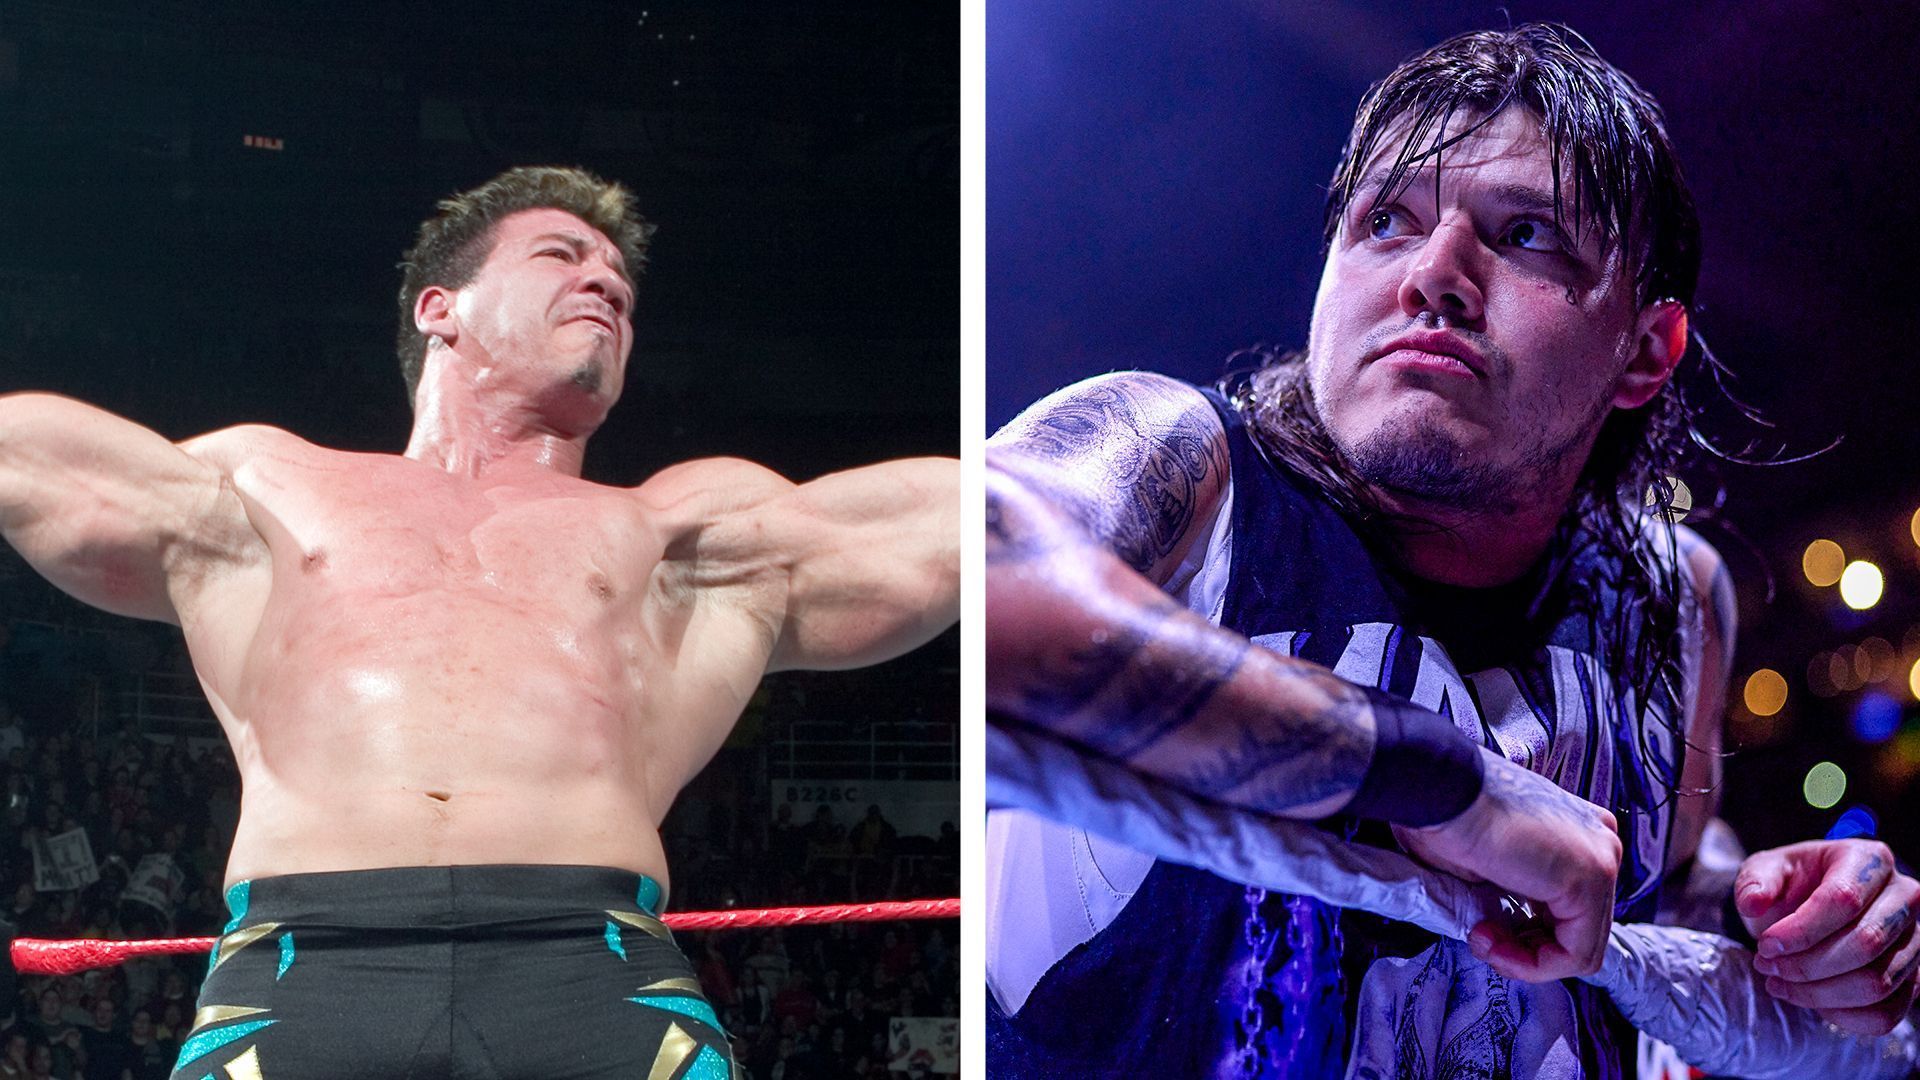 Some fans are unsure about the relationship between Eddie Guerrero and Dominik Mysterio